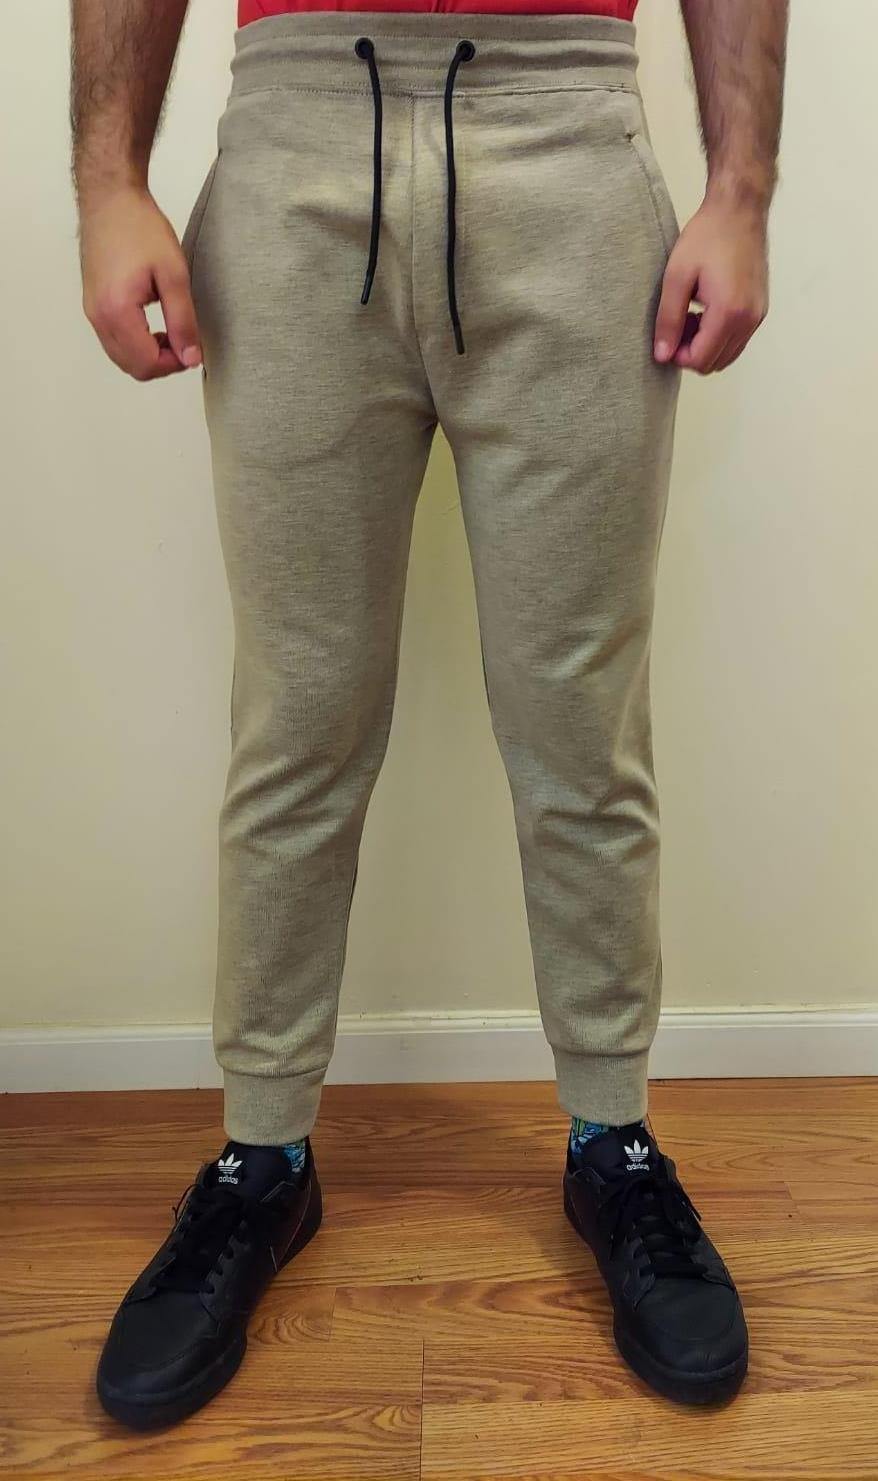 What is the difference between jogger pants and track pants? - Quora